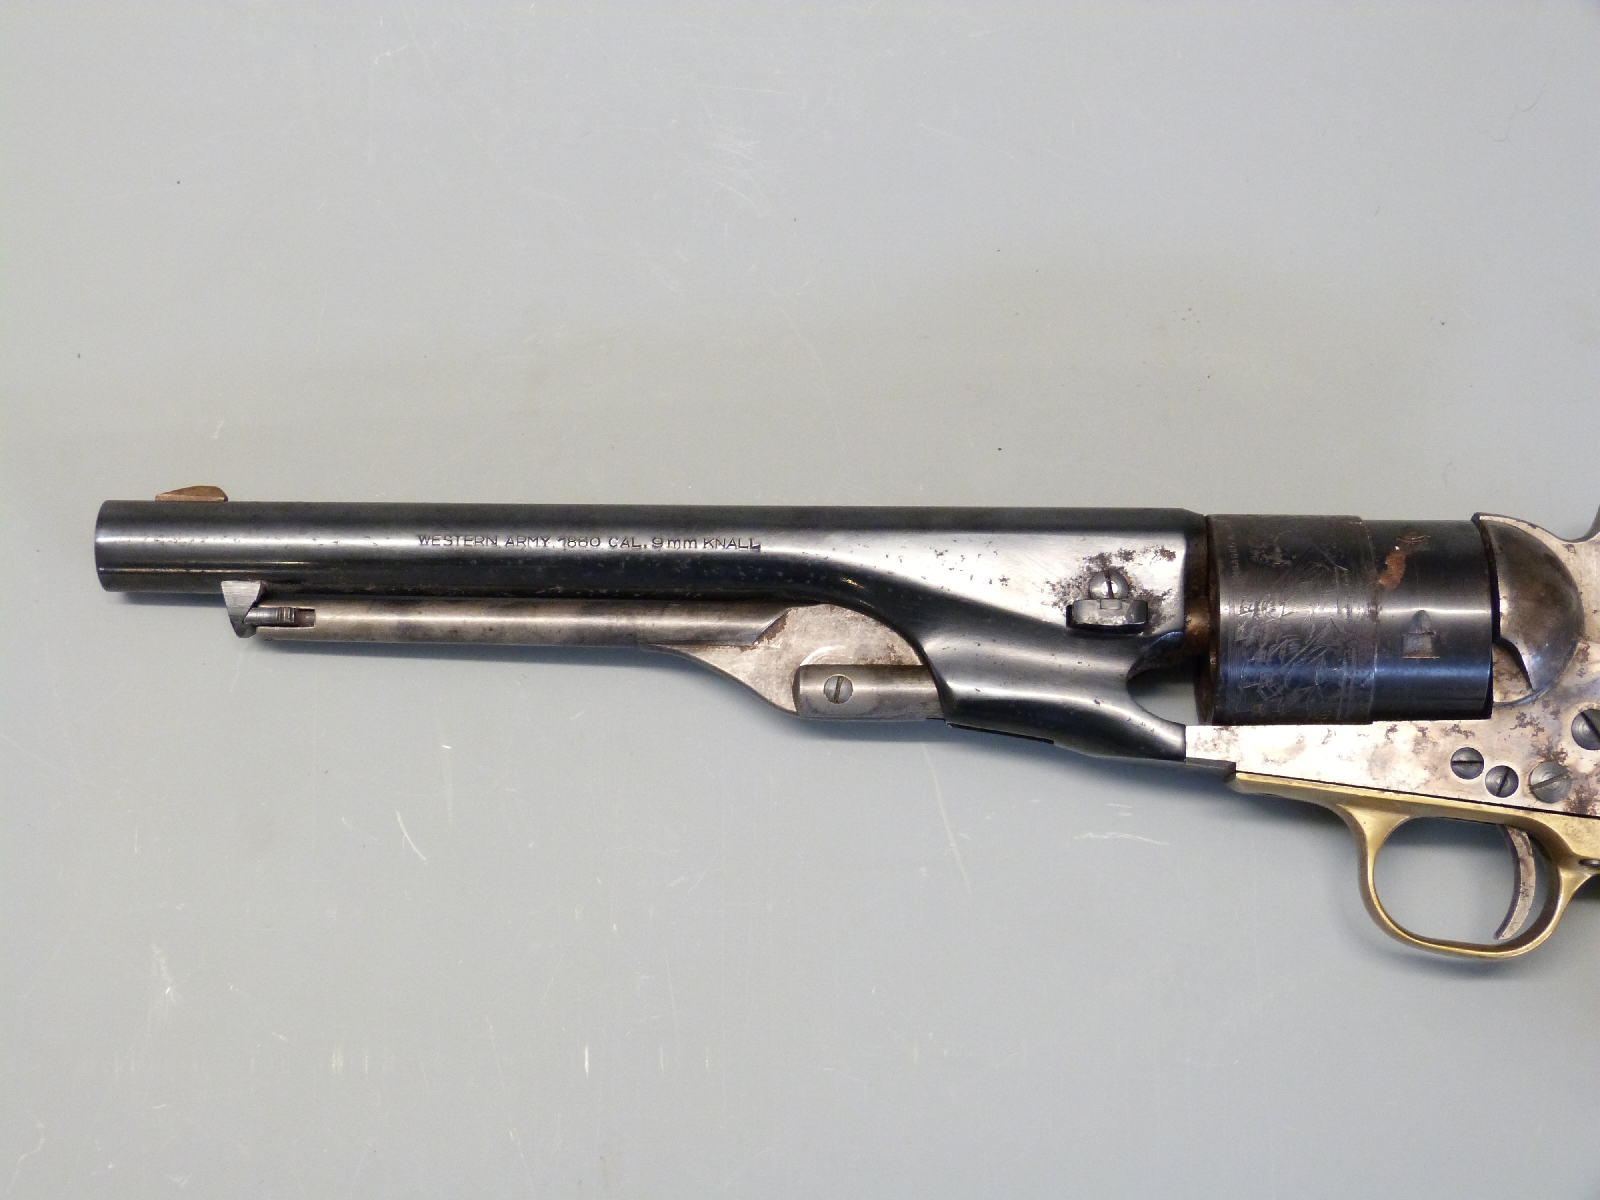 Pietta Western Army 1860 style 9mm blank firing six shot revolver with engraved scenes of ships to - Image 6 of 6